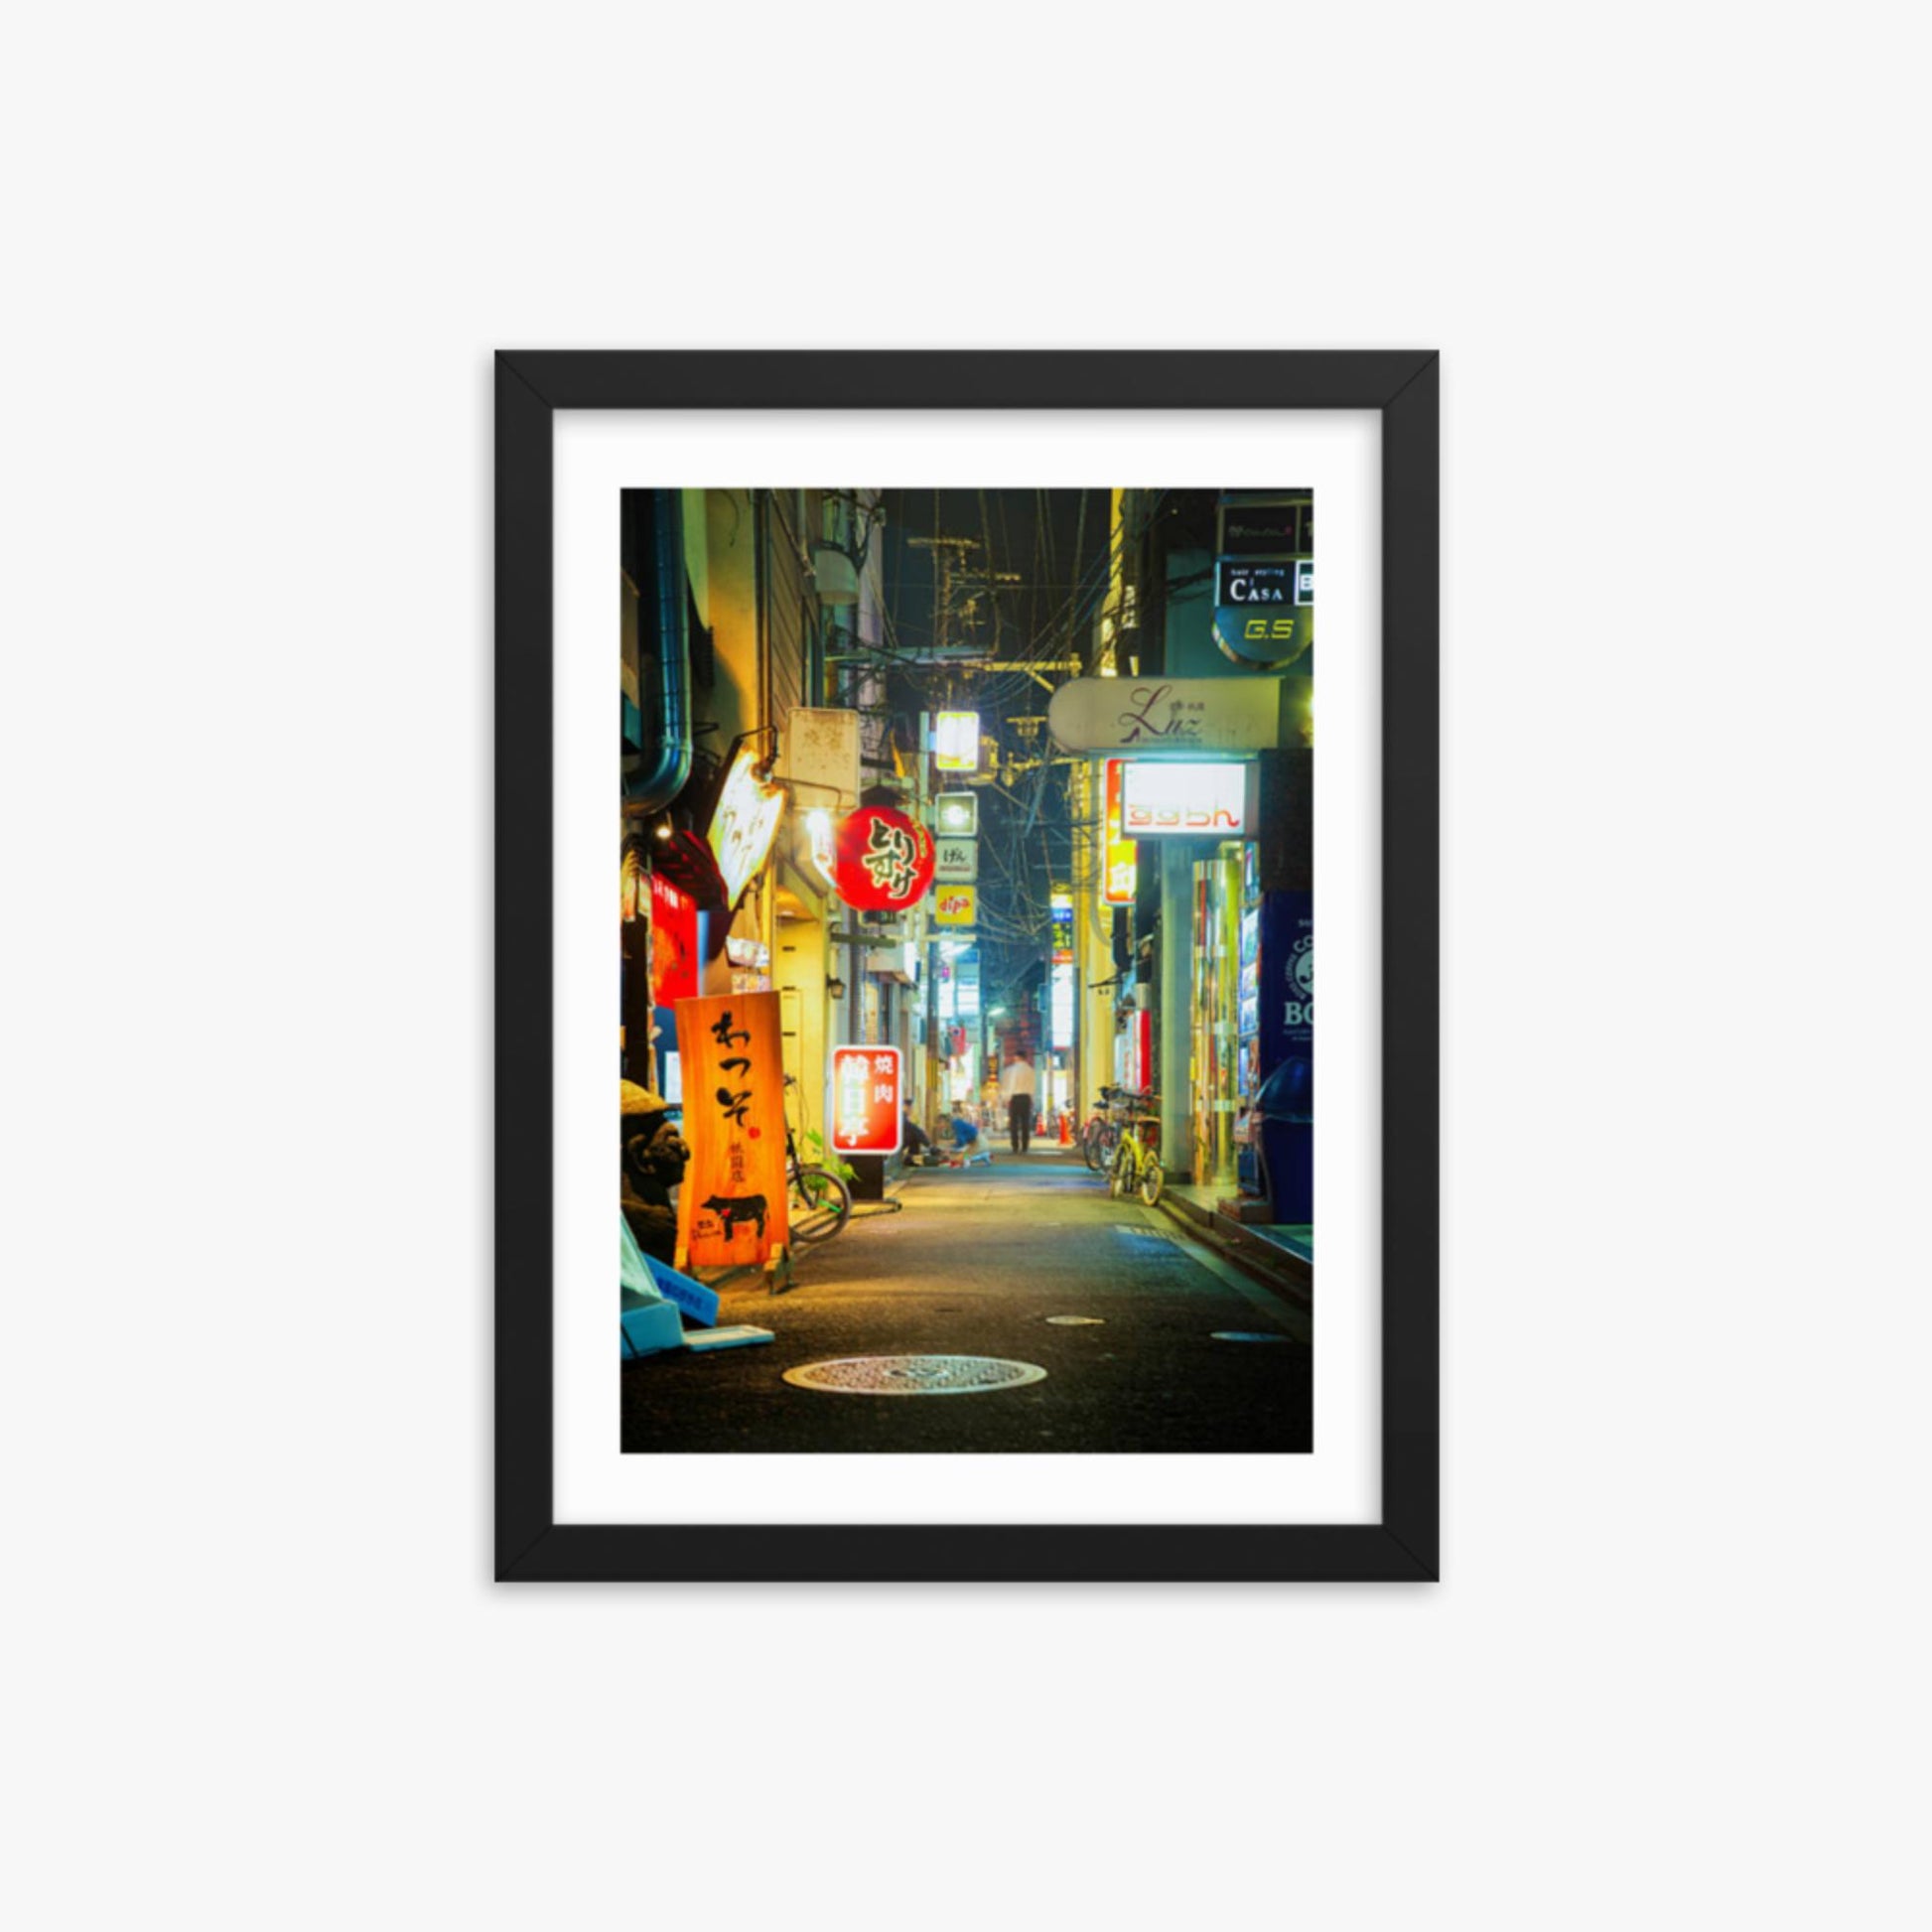 Kyoto, Japan backstreet at night 12x16 in Poster With Black Frame